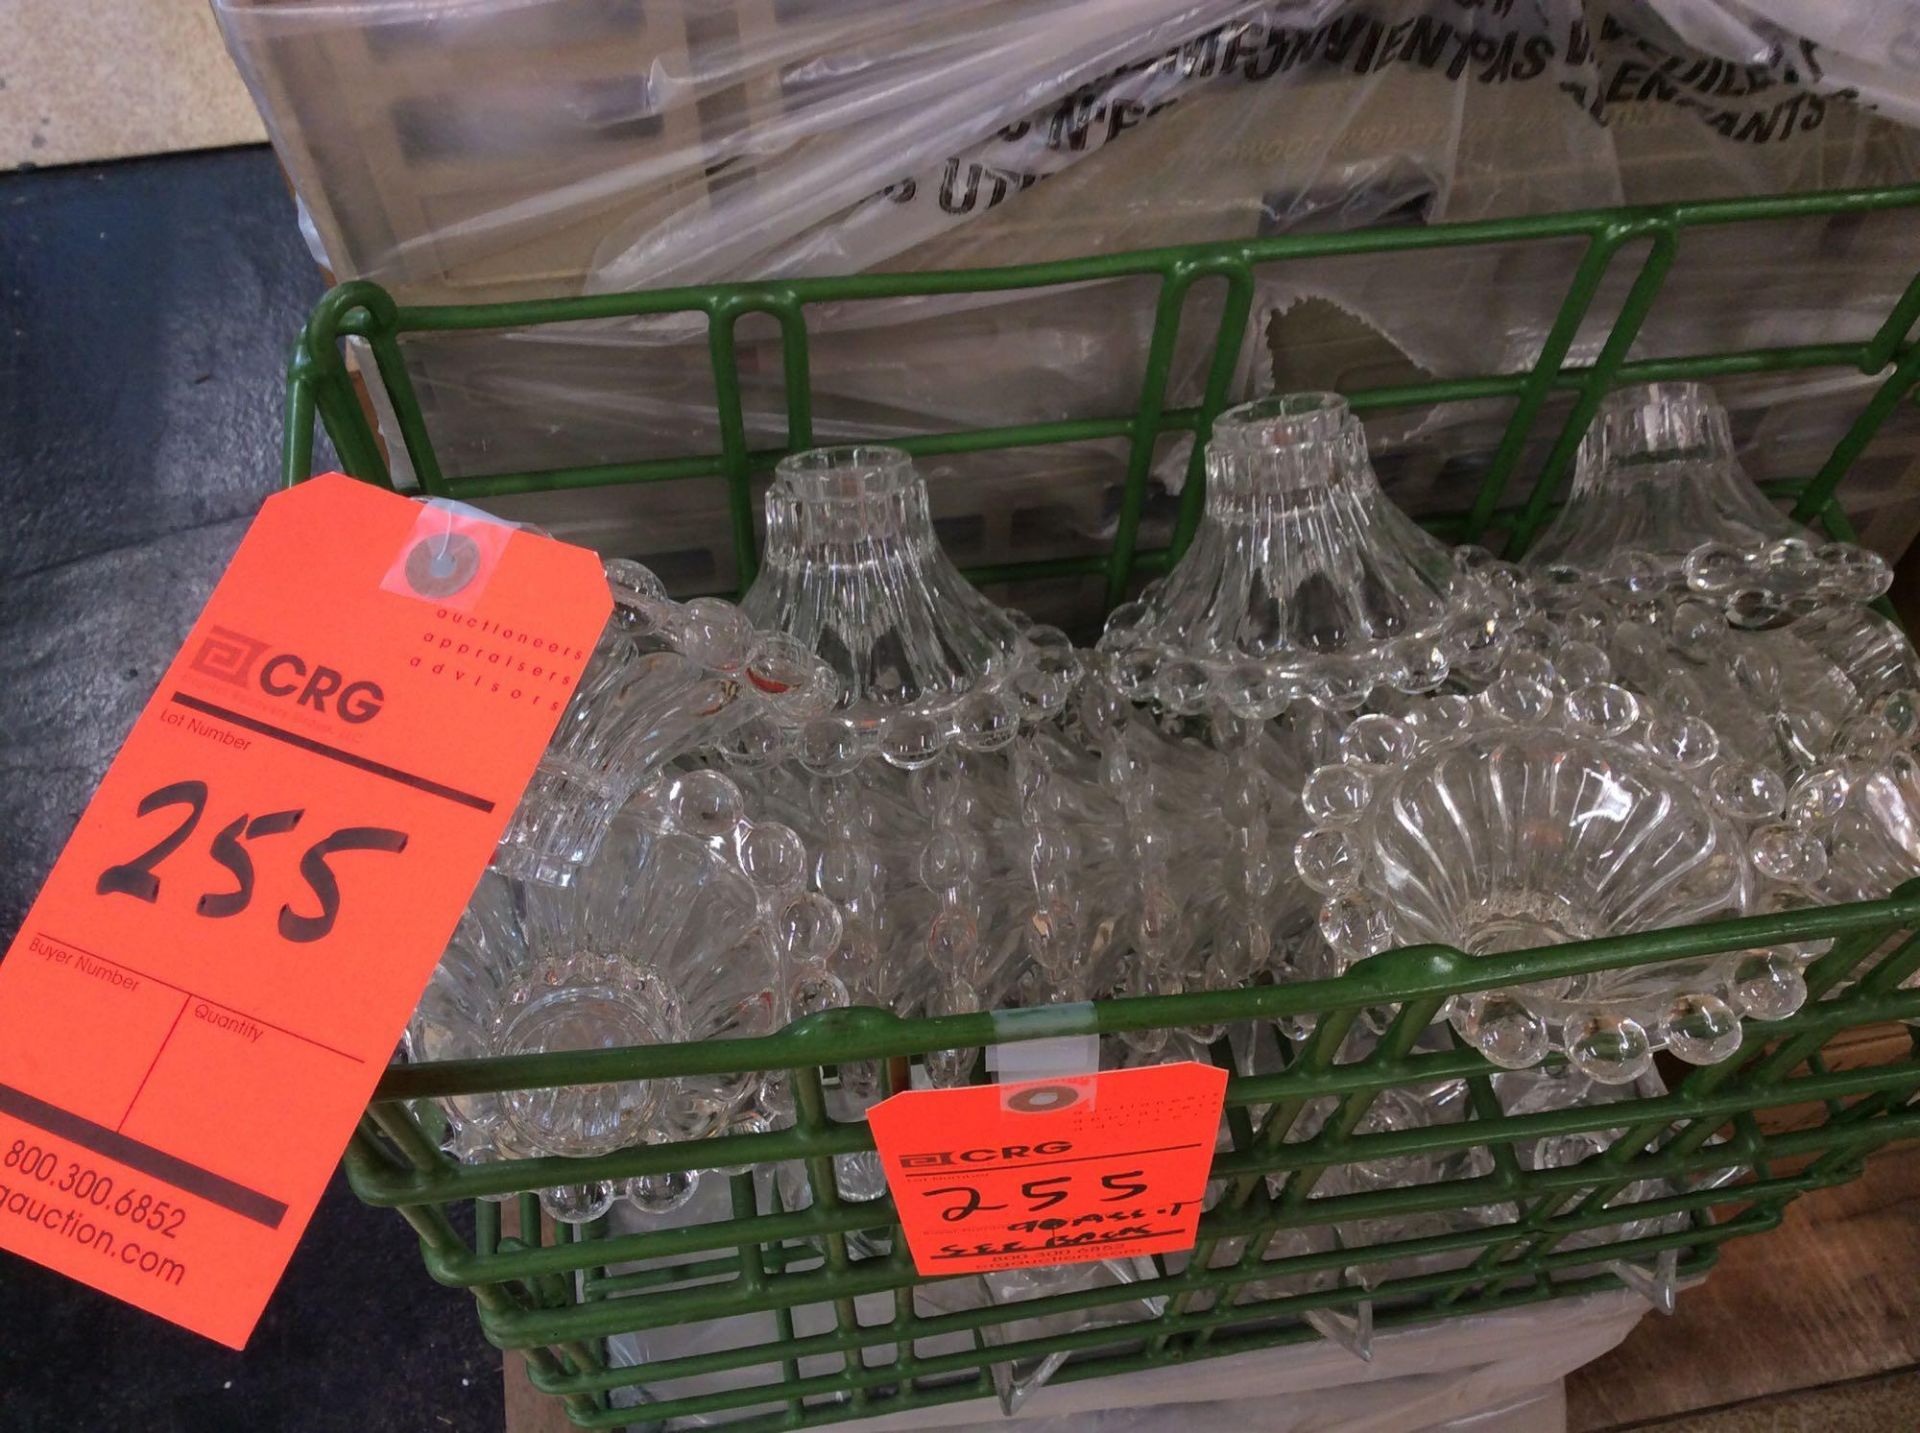 Lot of (90) glass star style candle holders with (4) racks, add'l $8 fee per rack